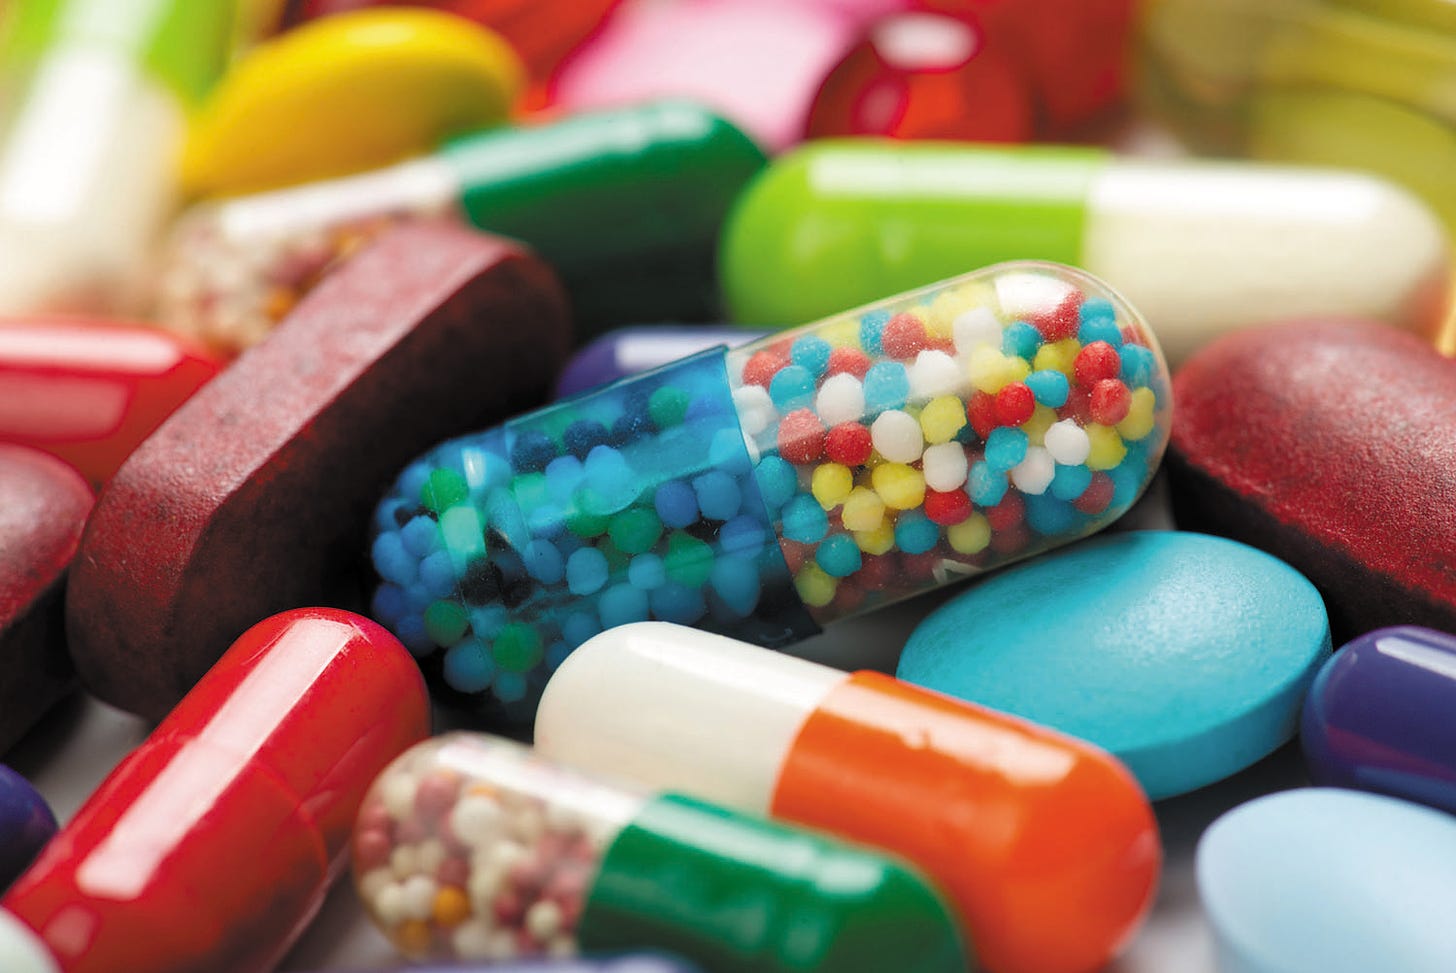 Antibiotics: Part of the cure or part of the problem? - Harvard Health